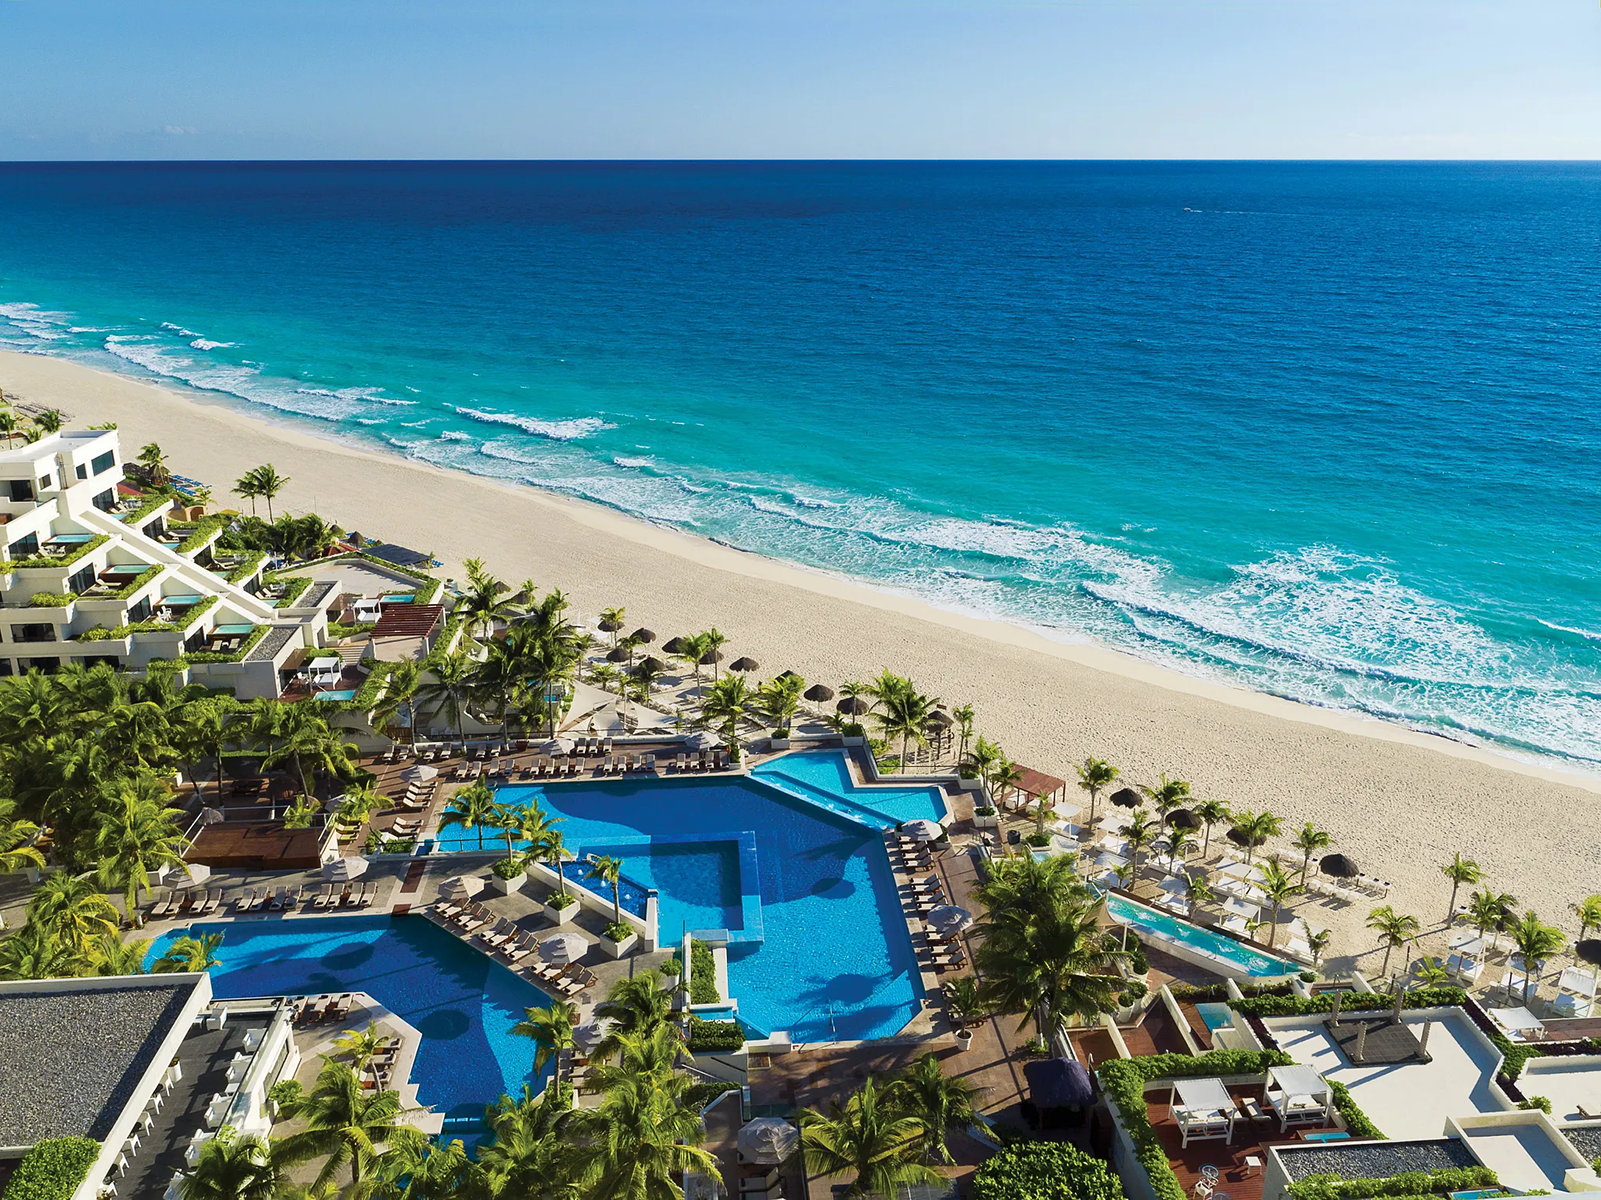 Luxury Cancun All Inclusive Family Resort All-Inclusive Timeshare Promotion